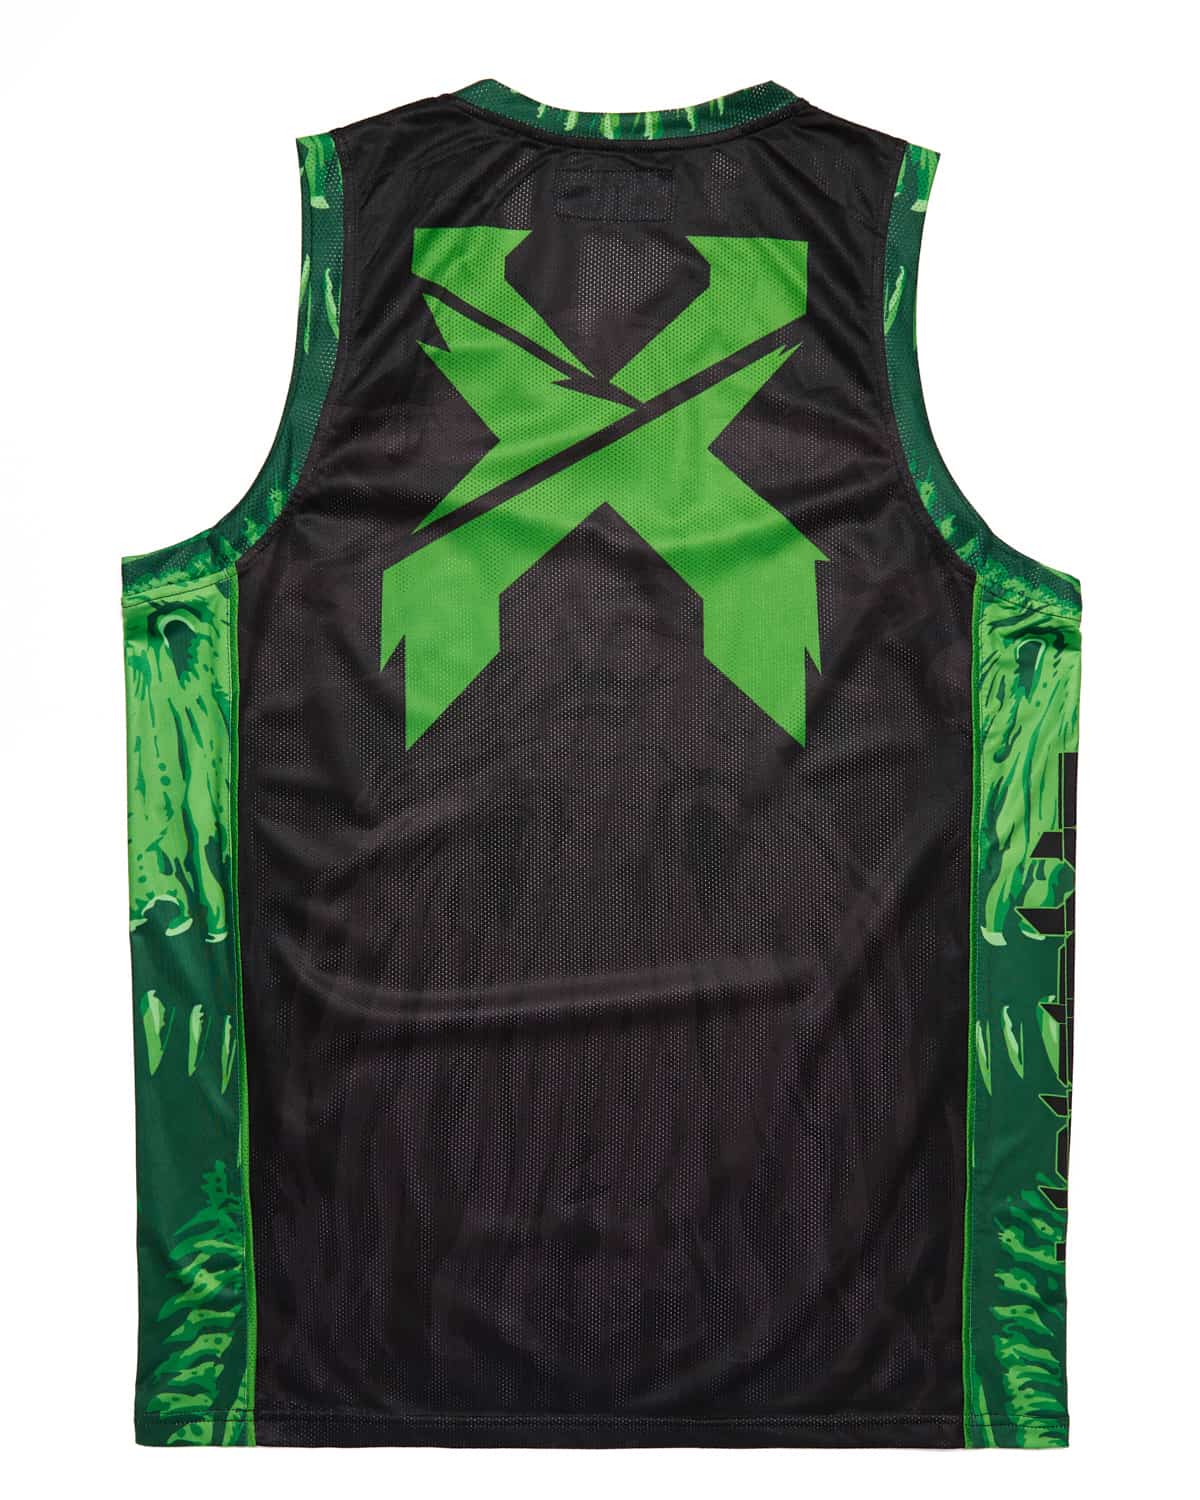 basketball jersey design black and green